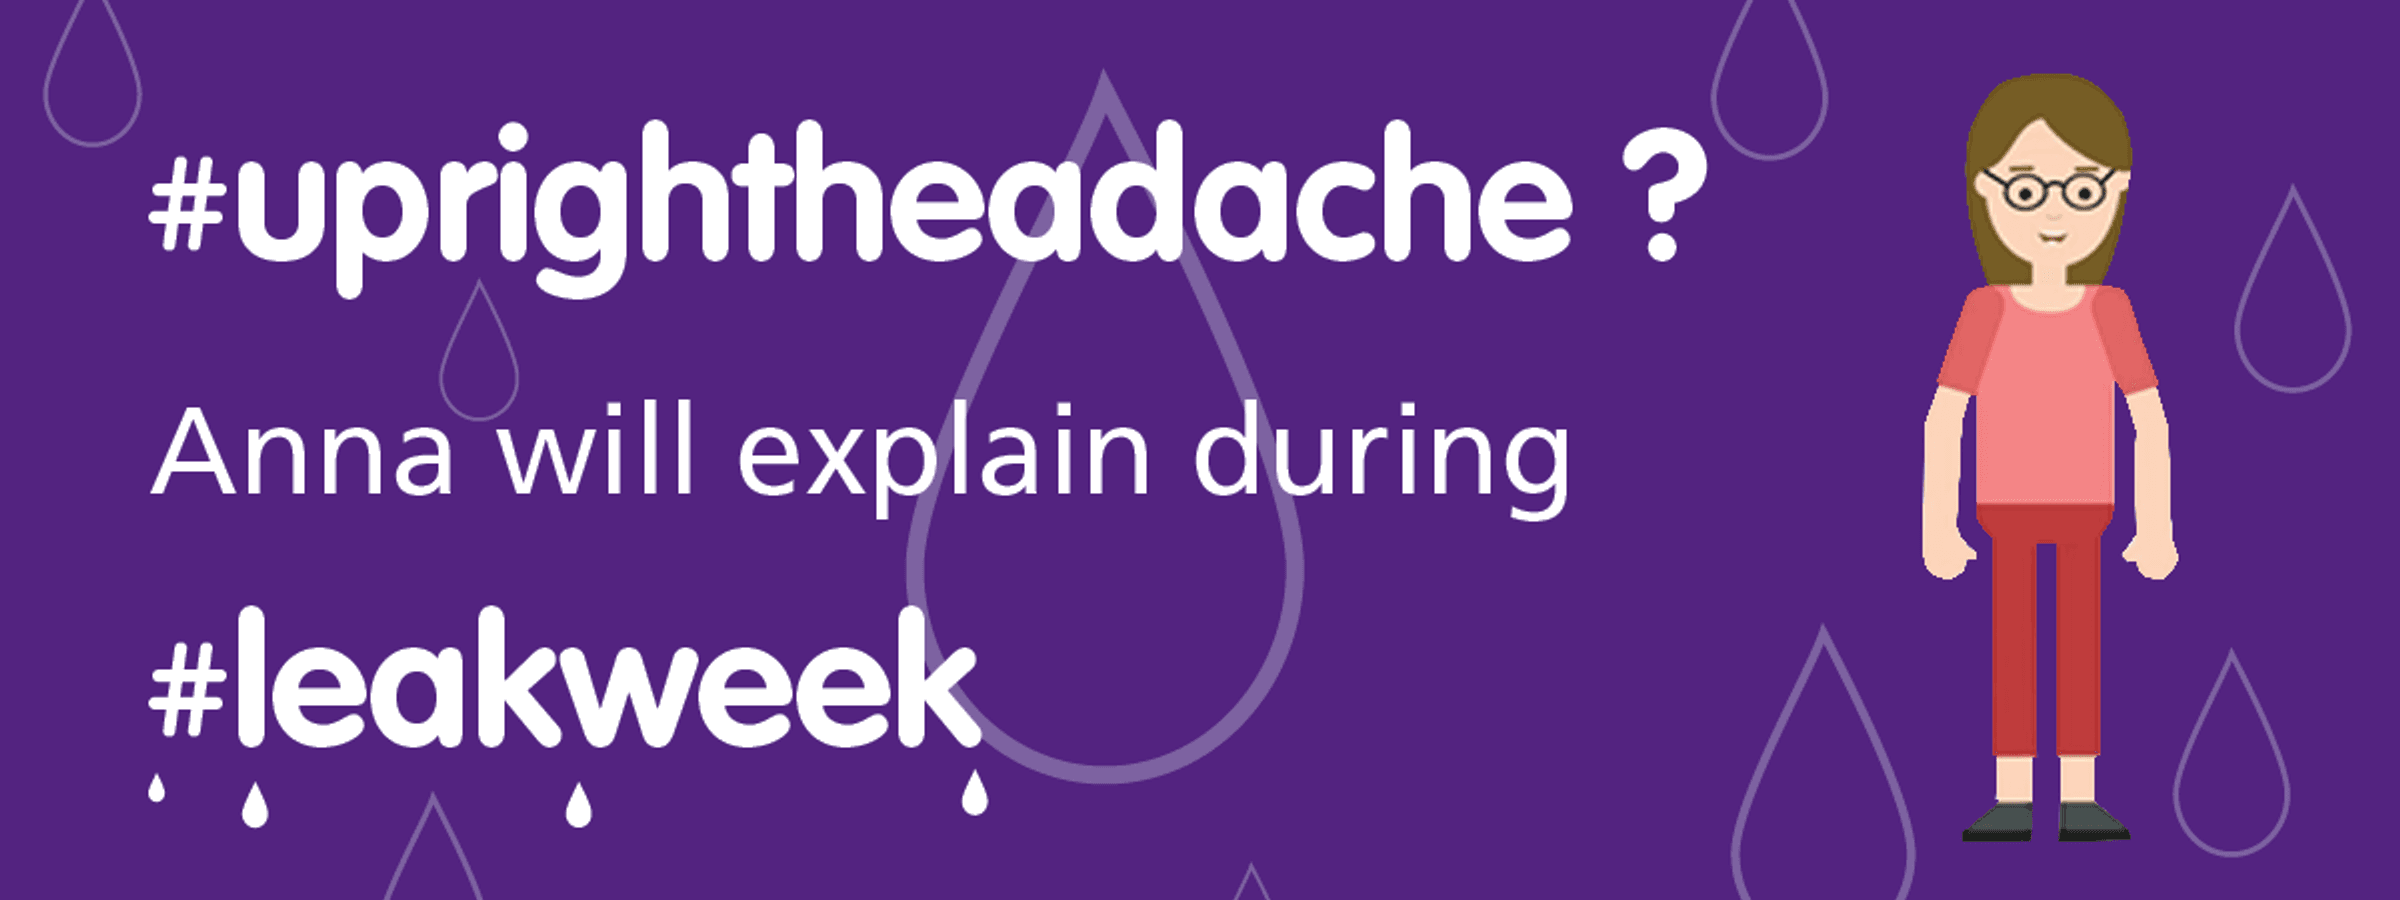 An illustration of a woman with the text "#upright headache? Anne will explain during #leakweek".